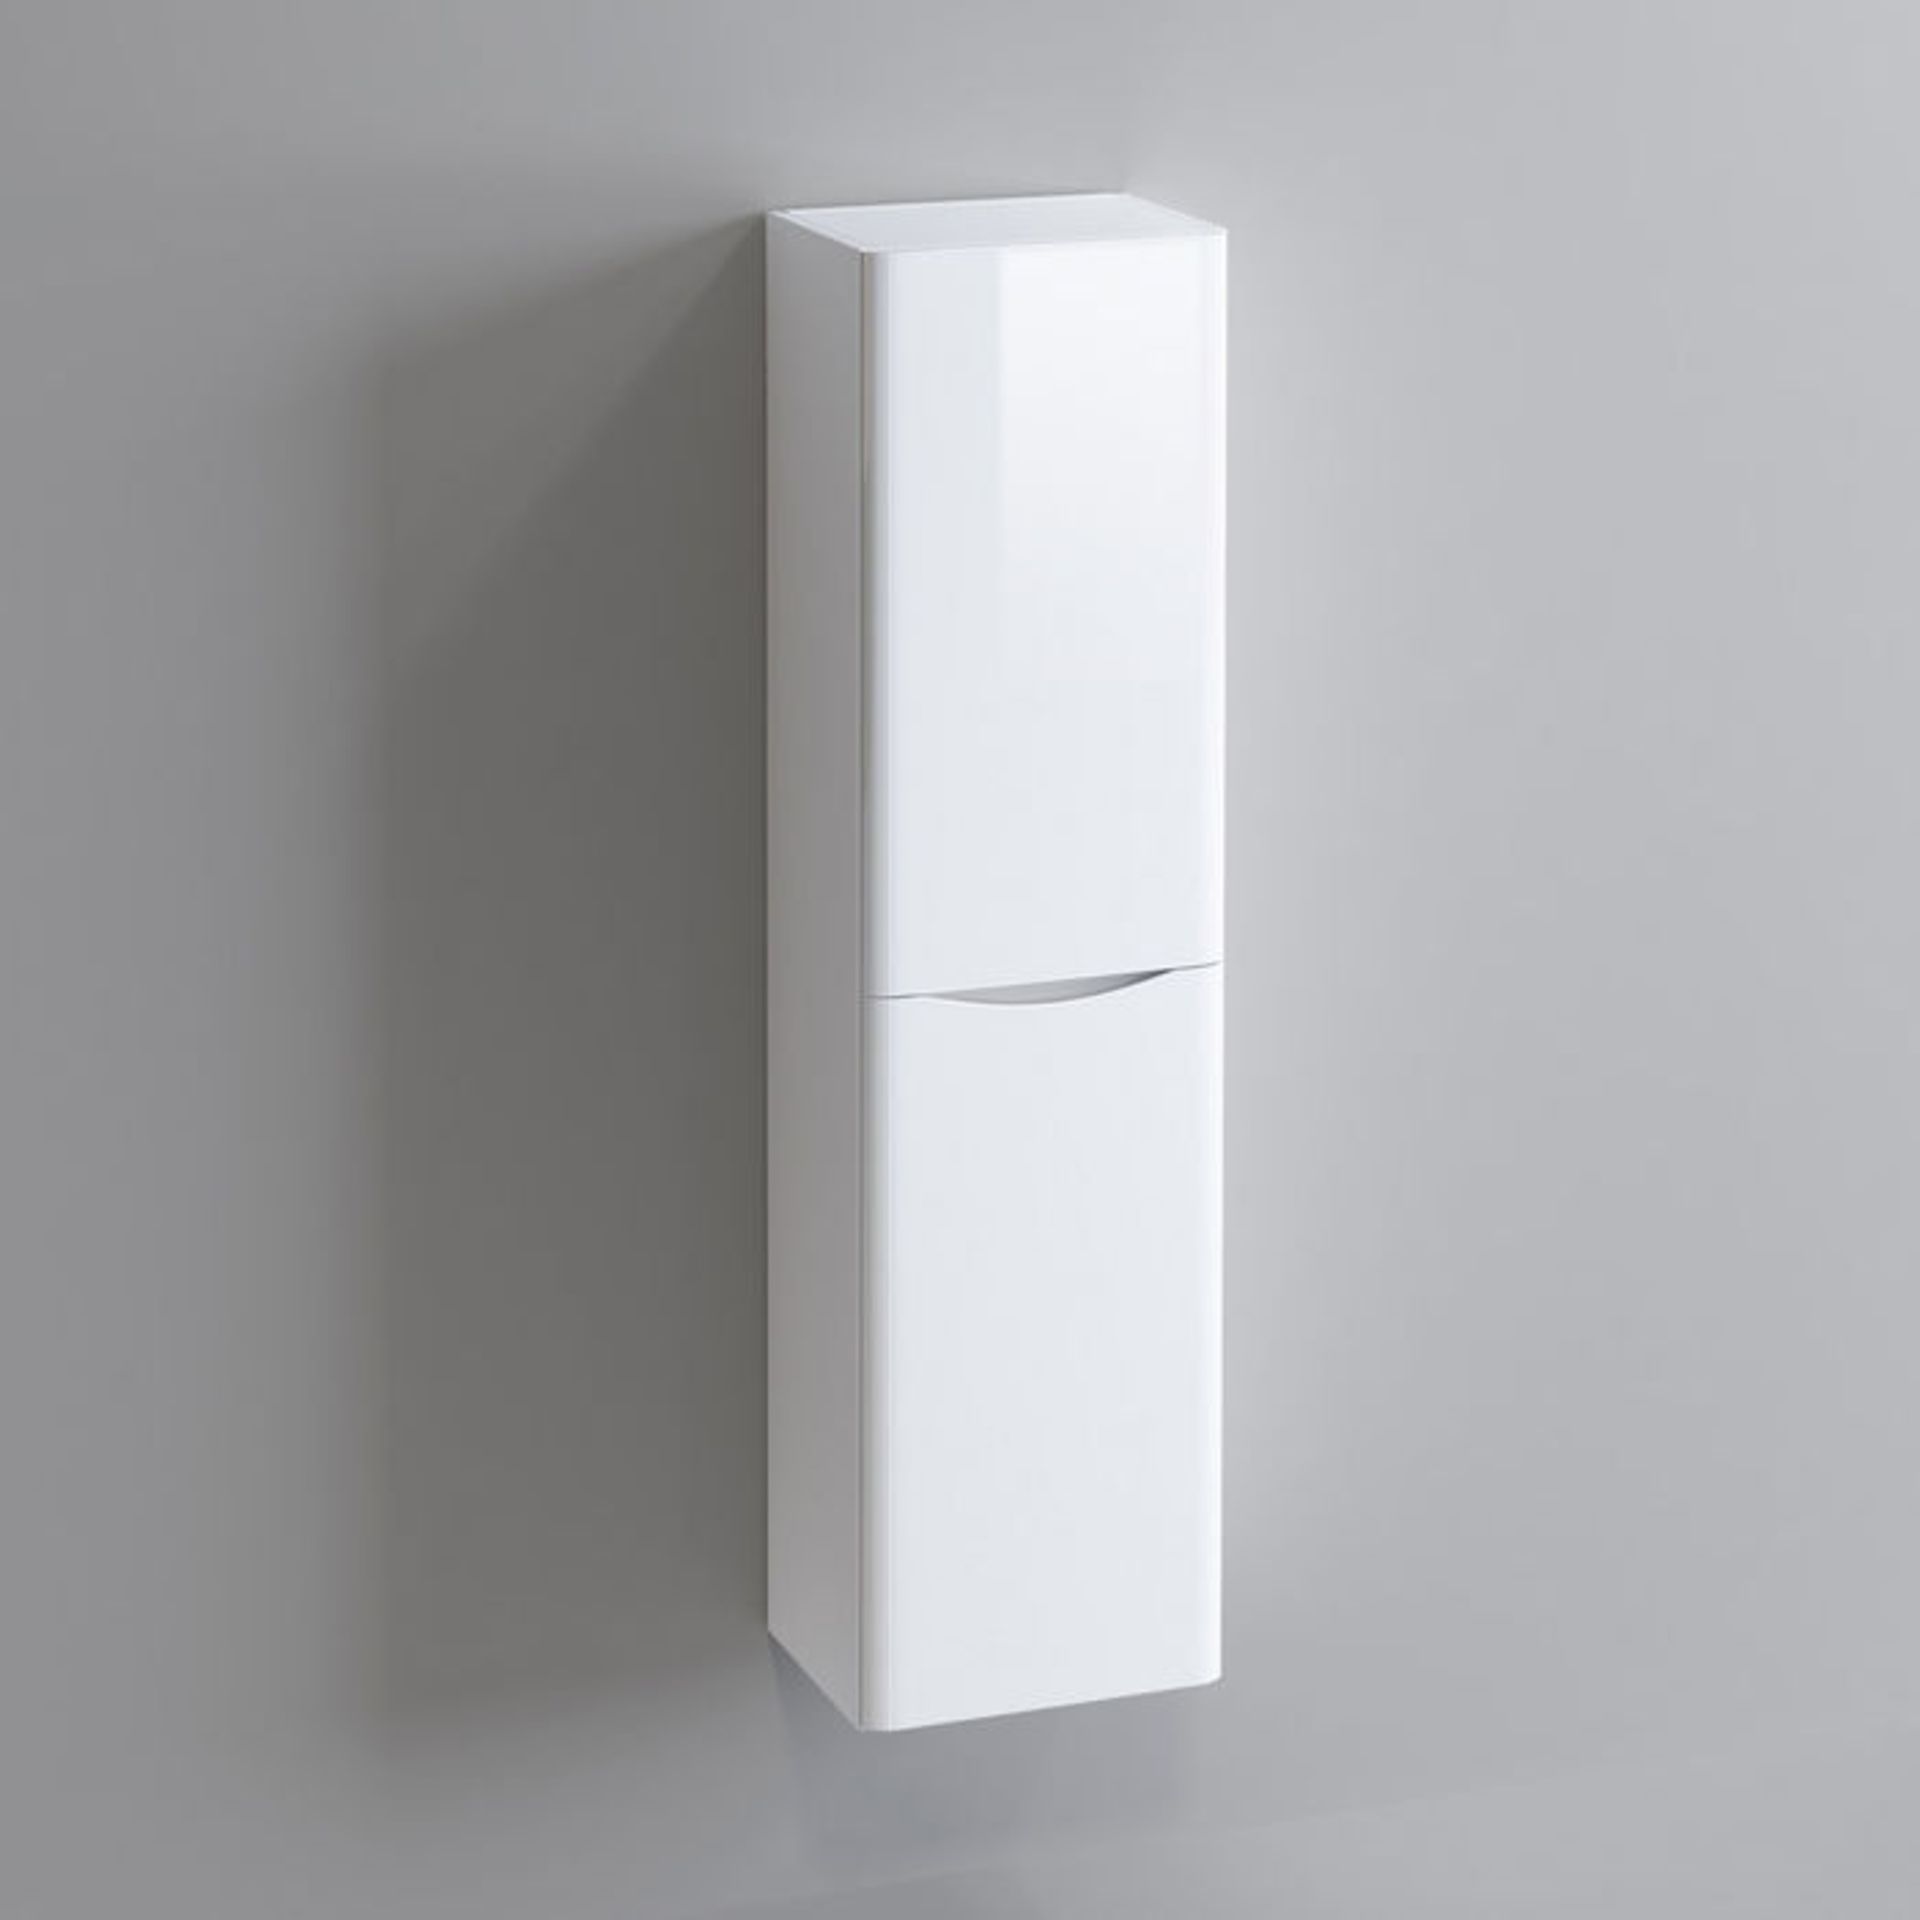 (SP52) 1400mm Austin II Gloss White Tall Wall Hung Storage Cabinet - Right Hand. RRP £299.99. - Image 4 of 5